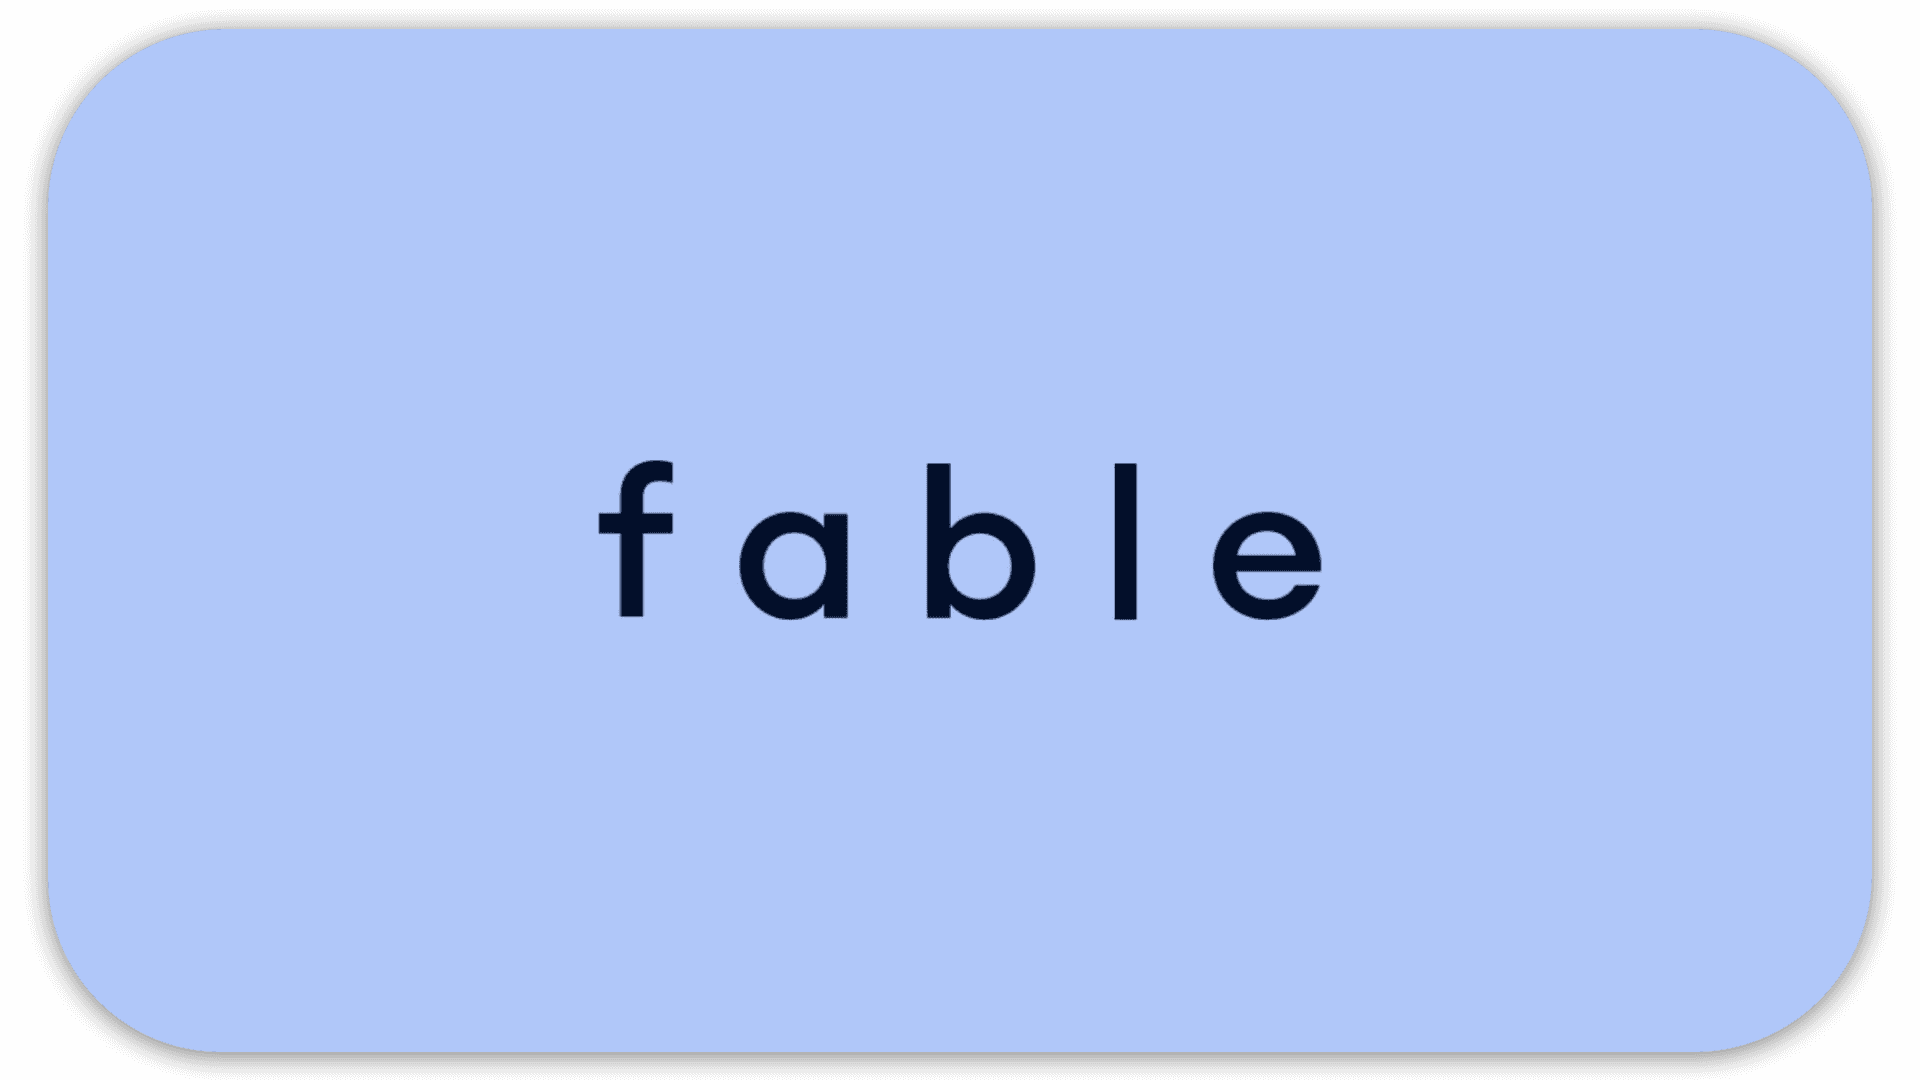 A blue rectangle with the word "fable" in lowercase black letters centered.